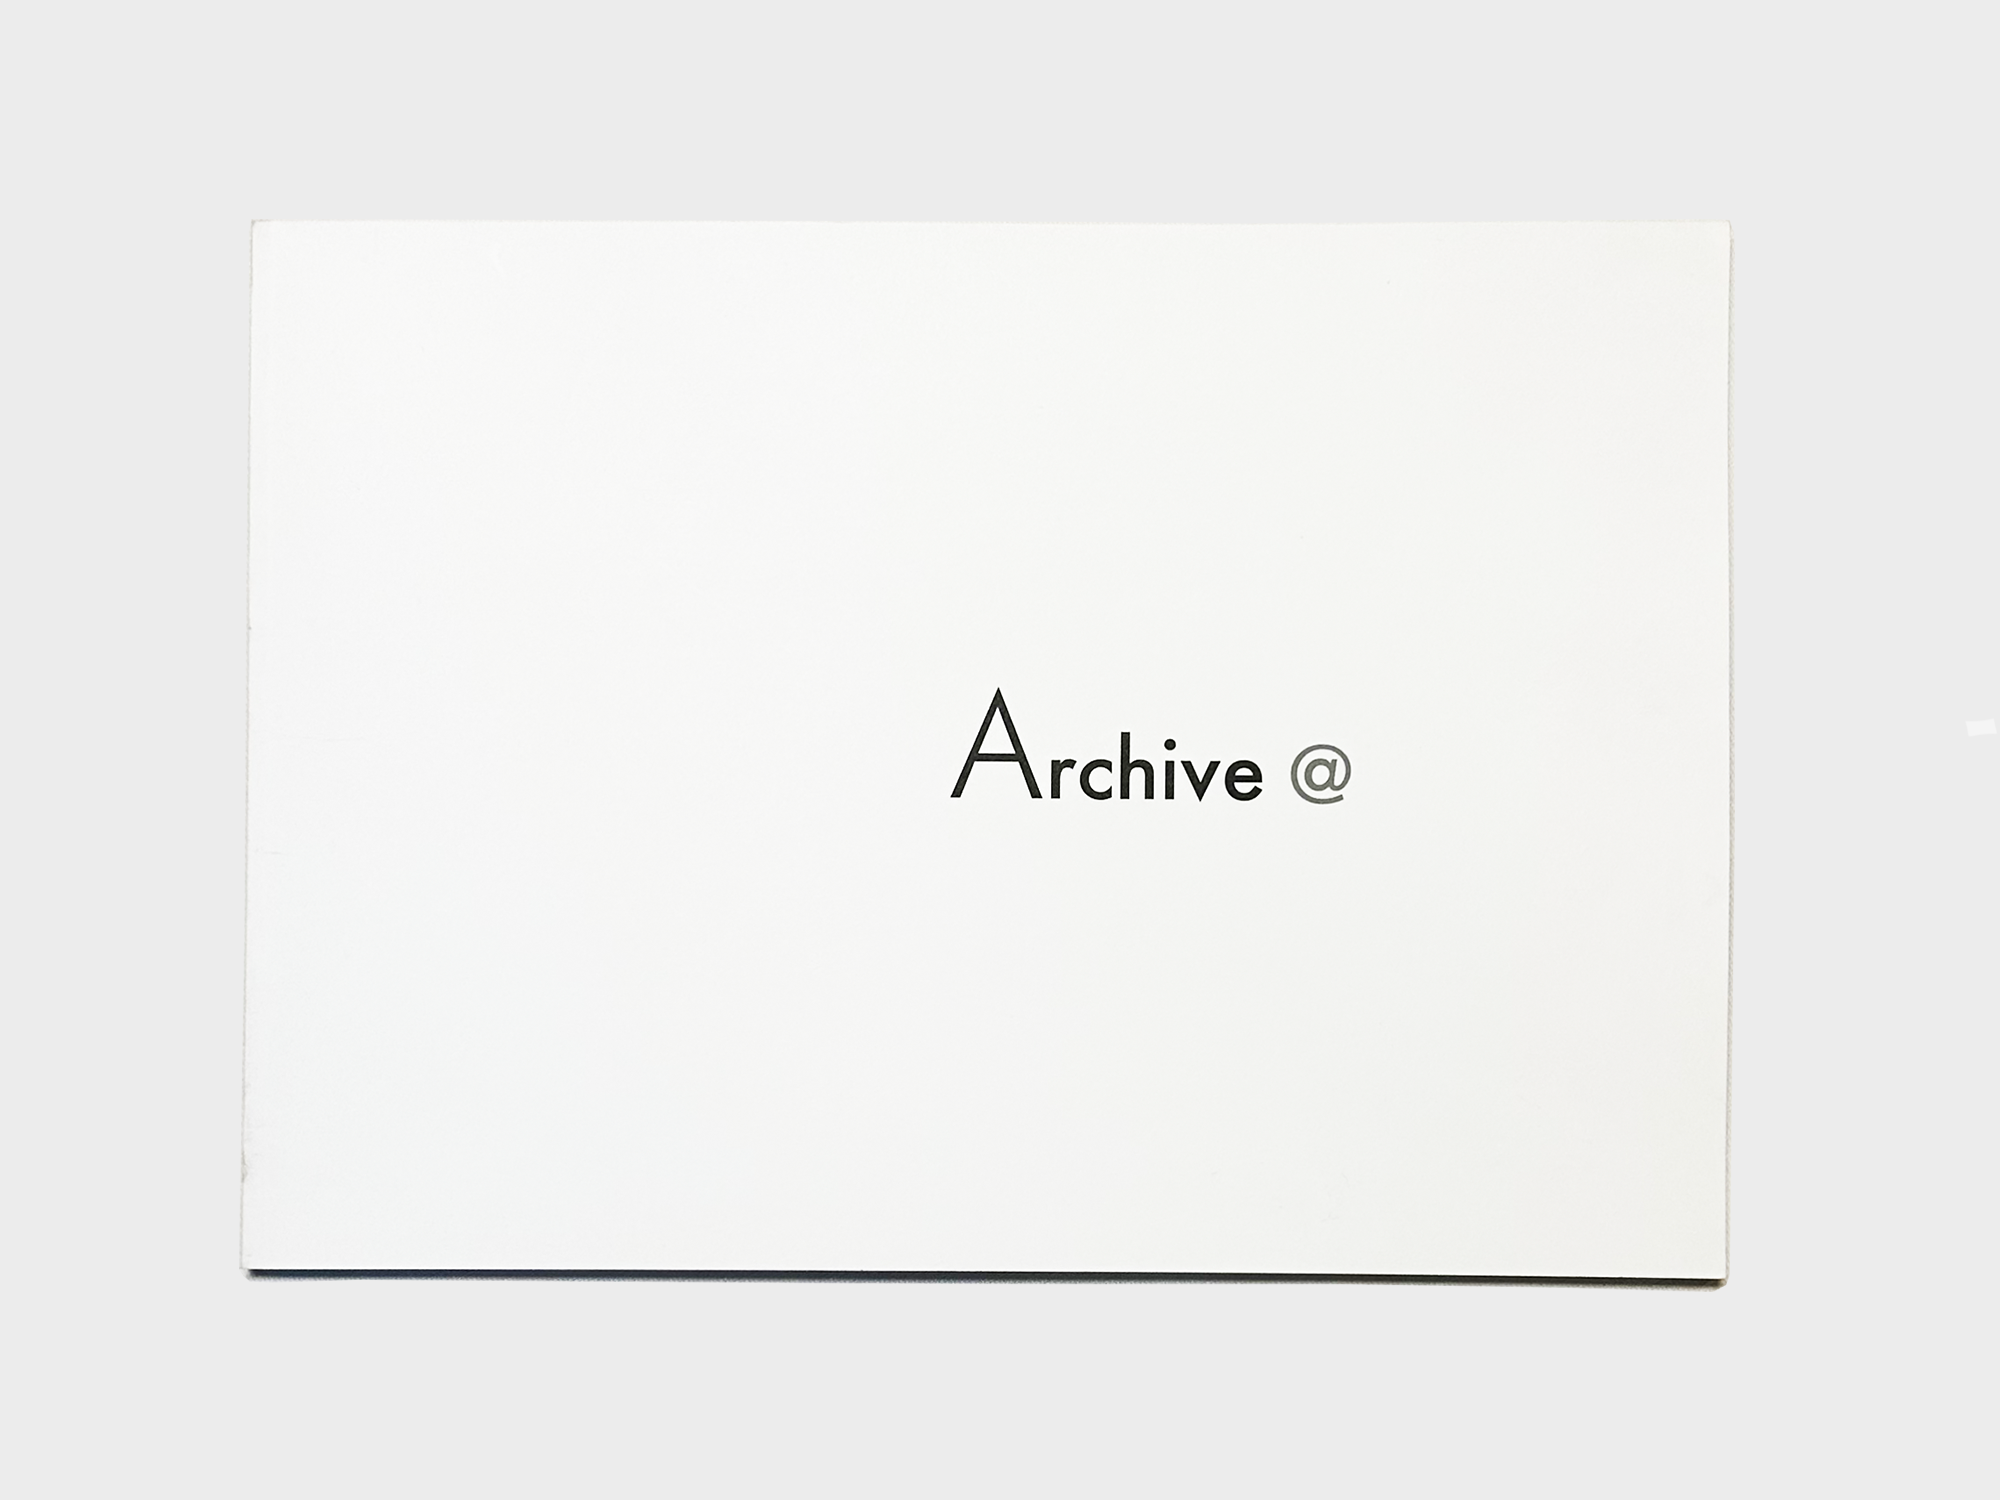 Archive@ Archive Directory